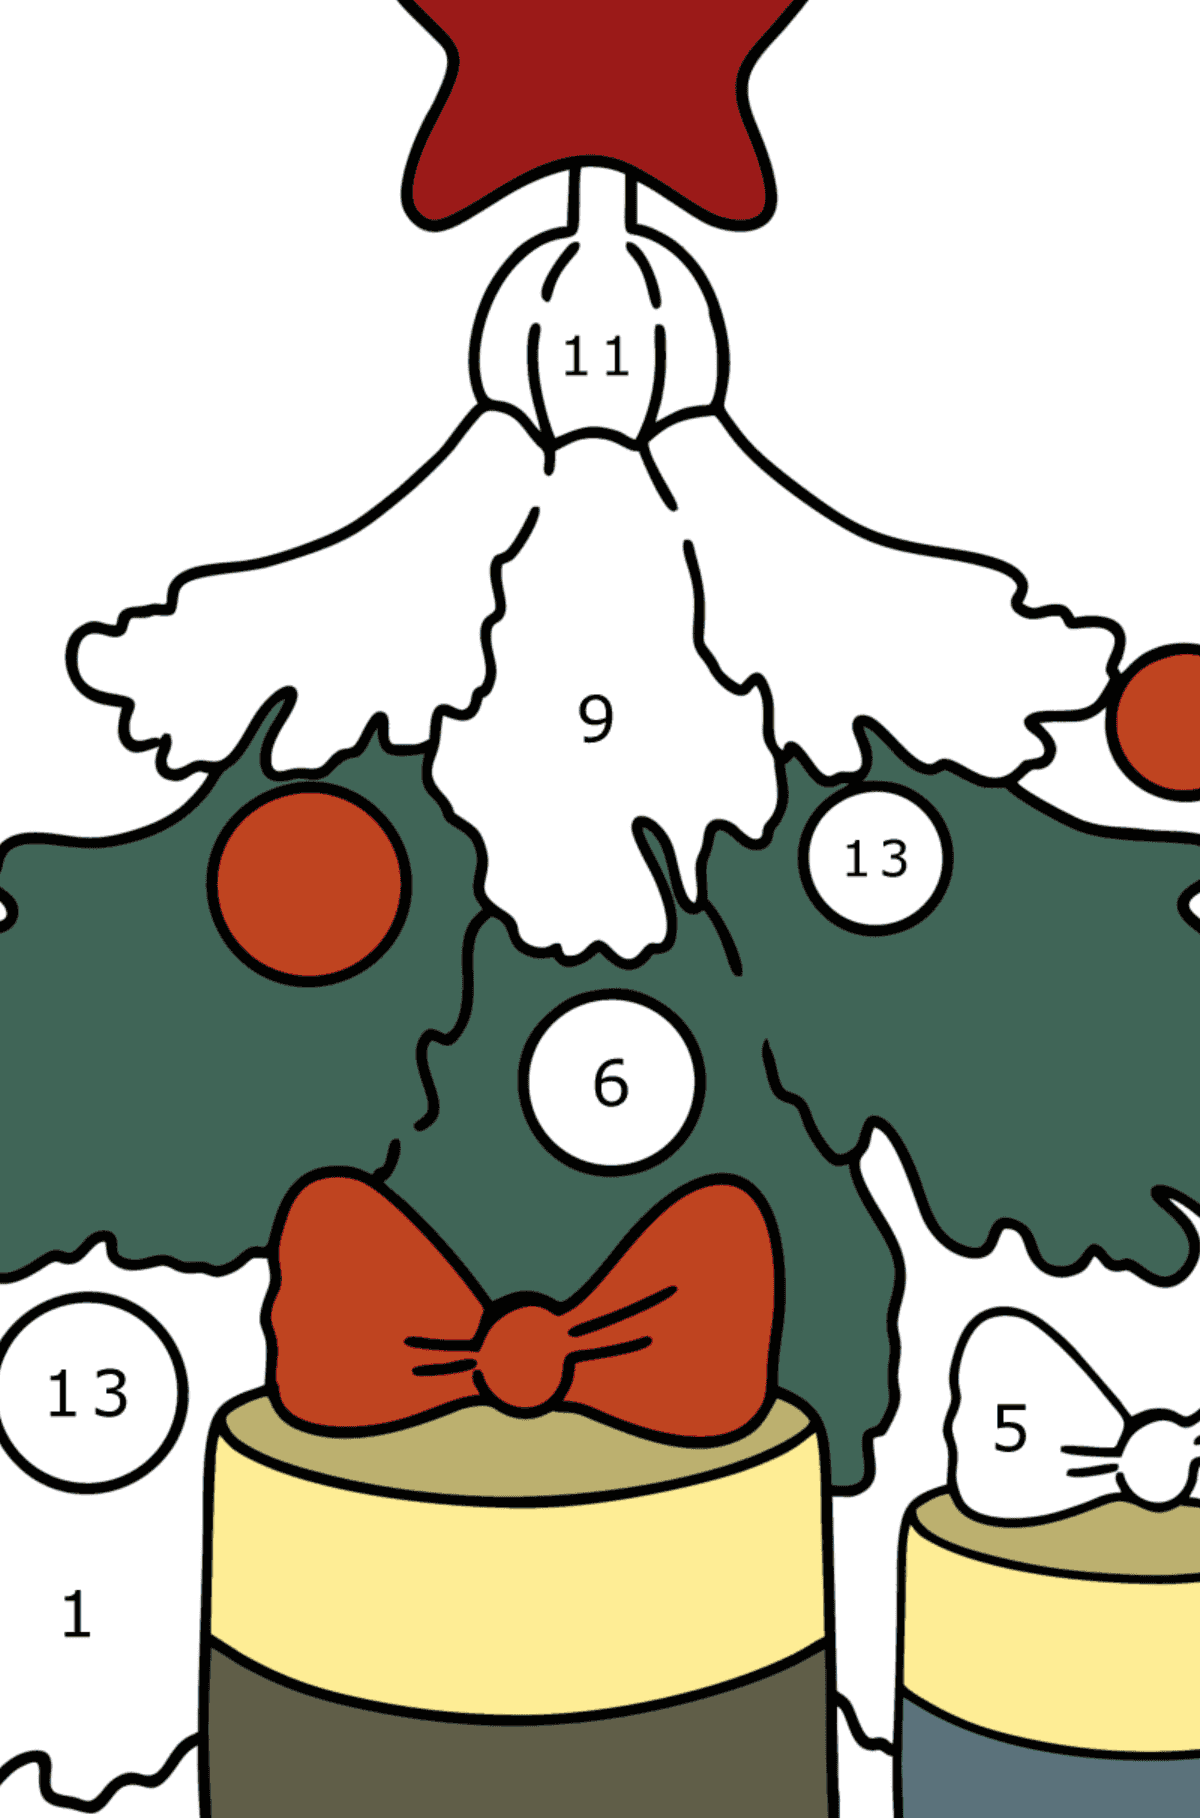 Christmas Tree and Gifts coloring page - Coloring by Numbers for Kids